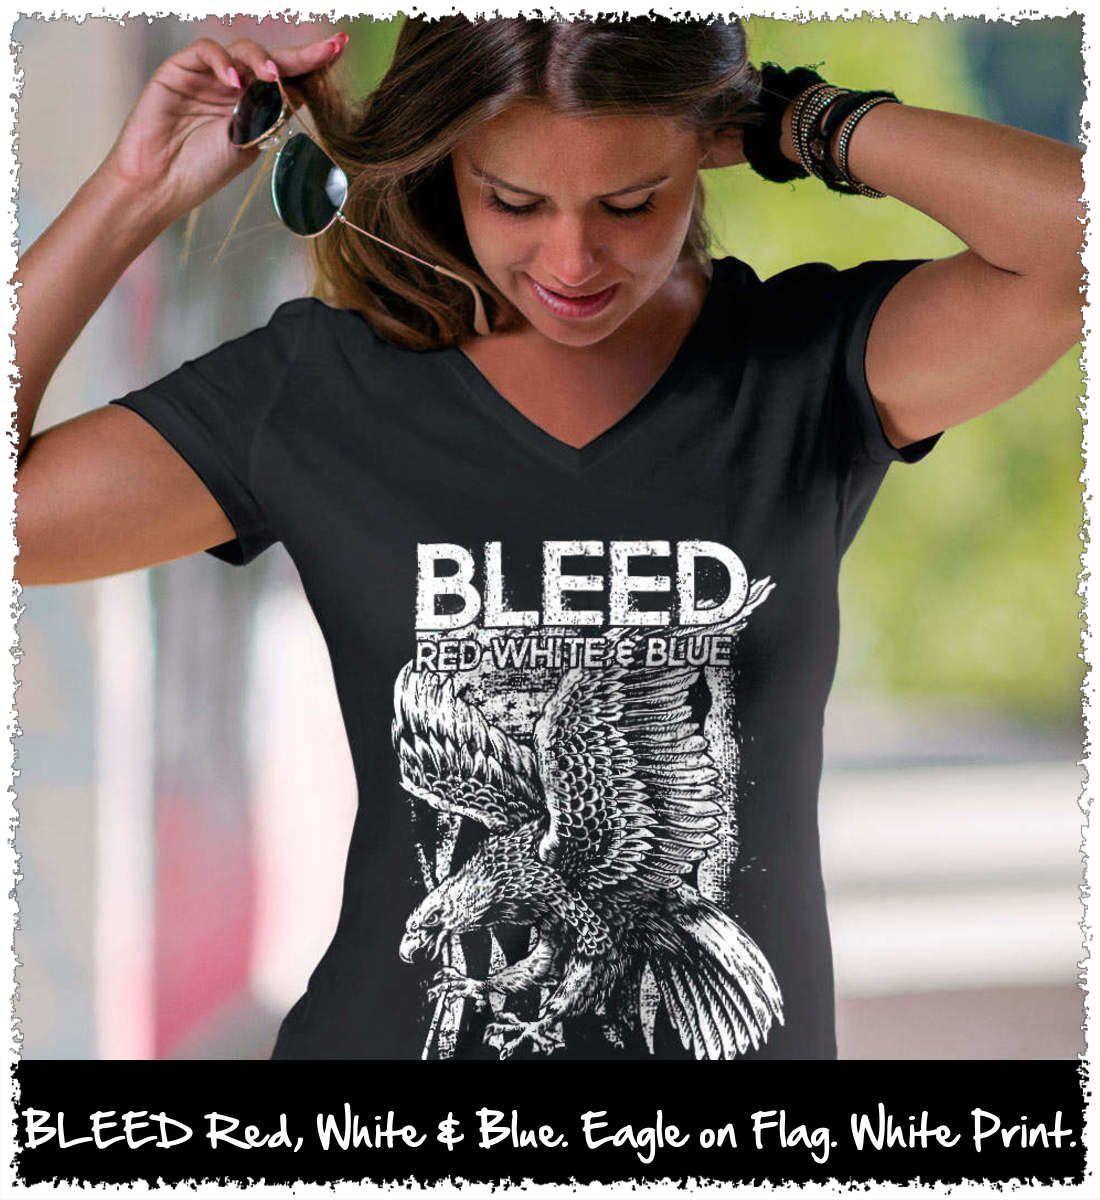 Lady Red White and Blue Eagles Logo - BLEED Red, White & Blue. Eagle on Flag. White Print. Women's: Anvil ...